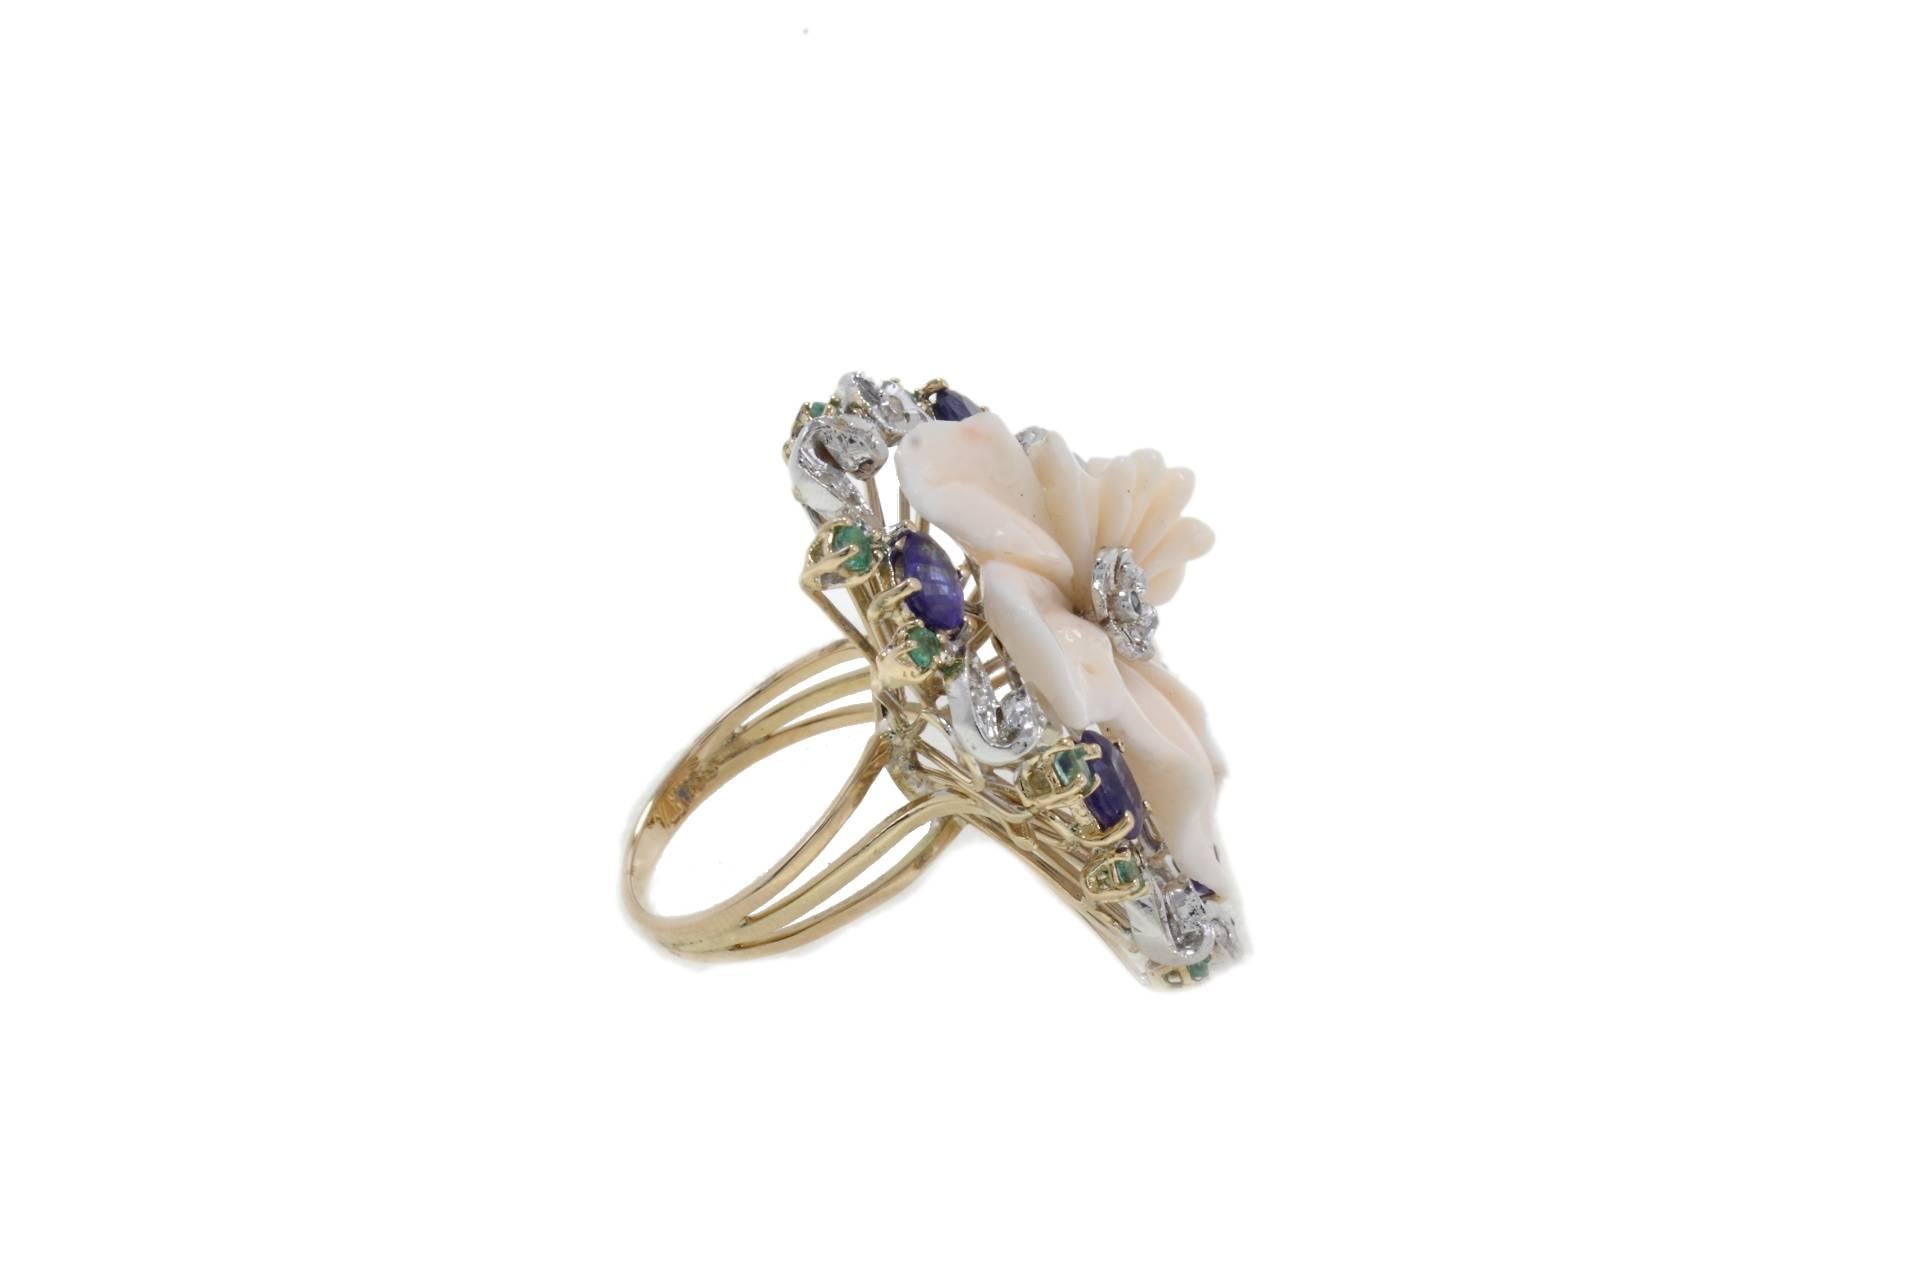 Fashion ring in 14k gold composed of flower shaped coral and mounted with diamonds, emeralds and blue sapphires.
Diamonds 0.30 kt
Emeralds, Blue Sapphires 4.13 kt
Coral 3.20 gr
Tot.Weight 15.00 gr
R.F ueff